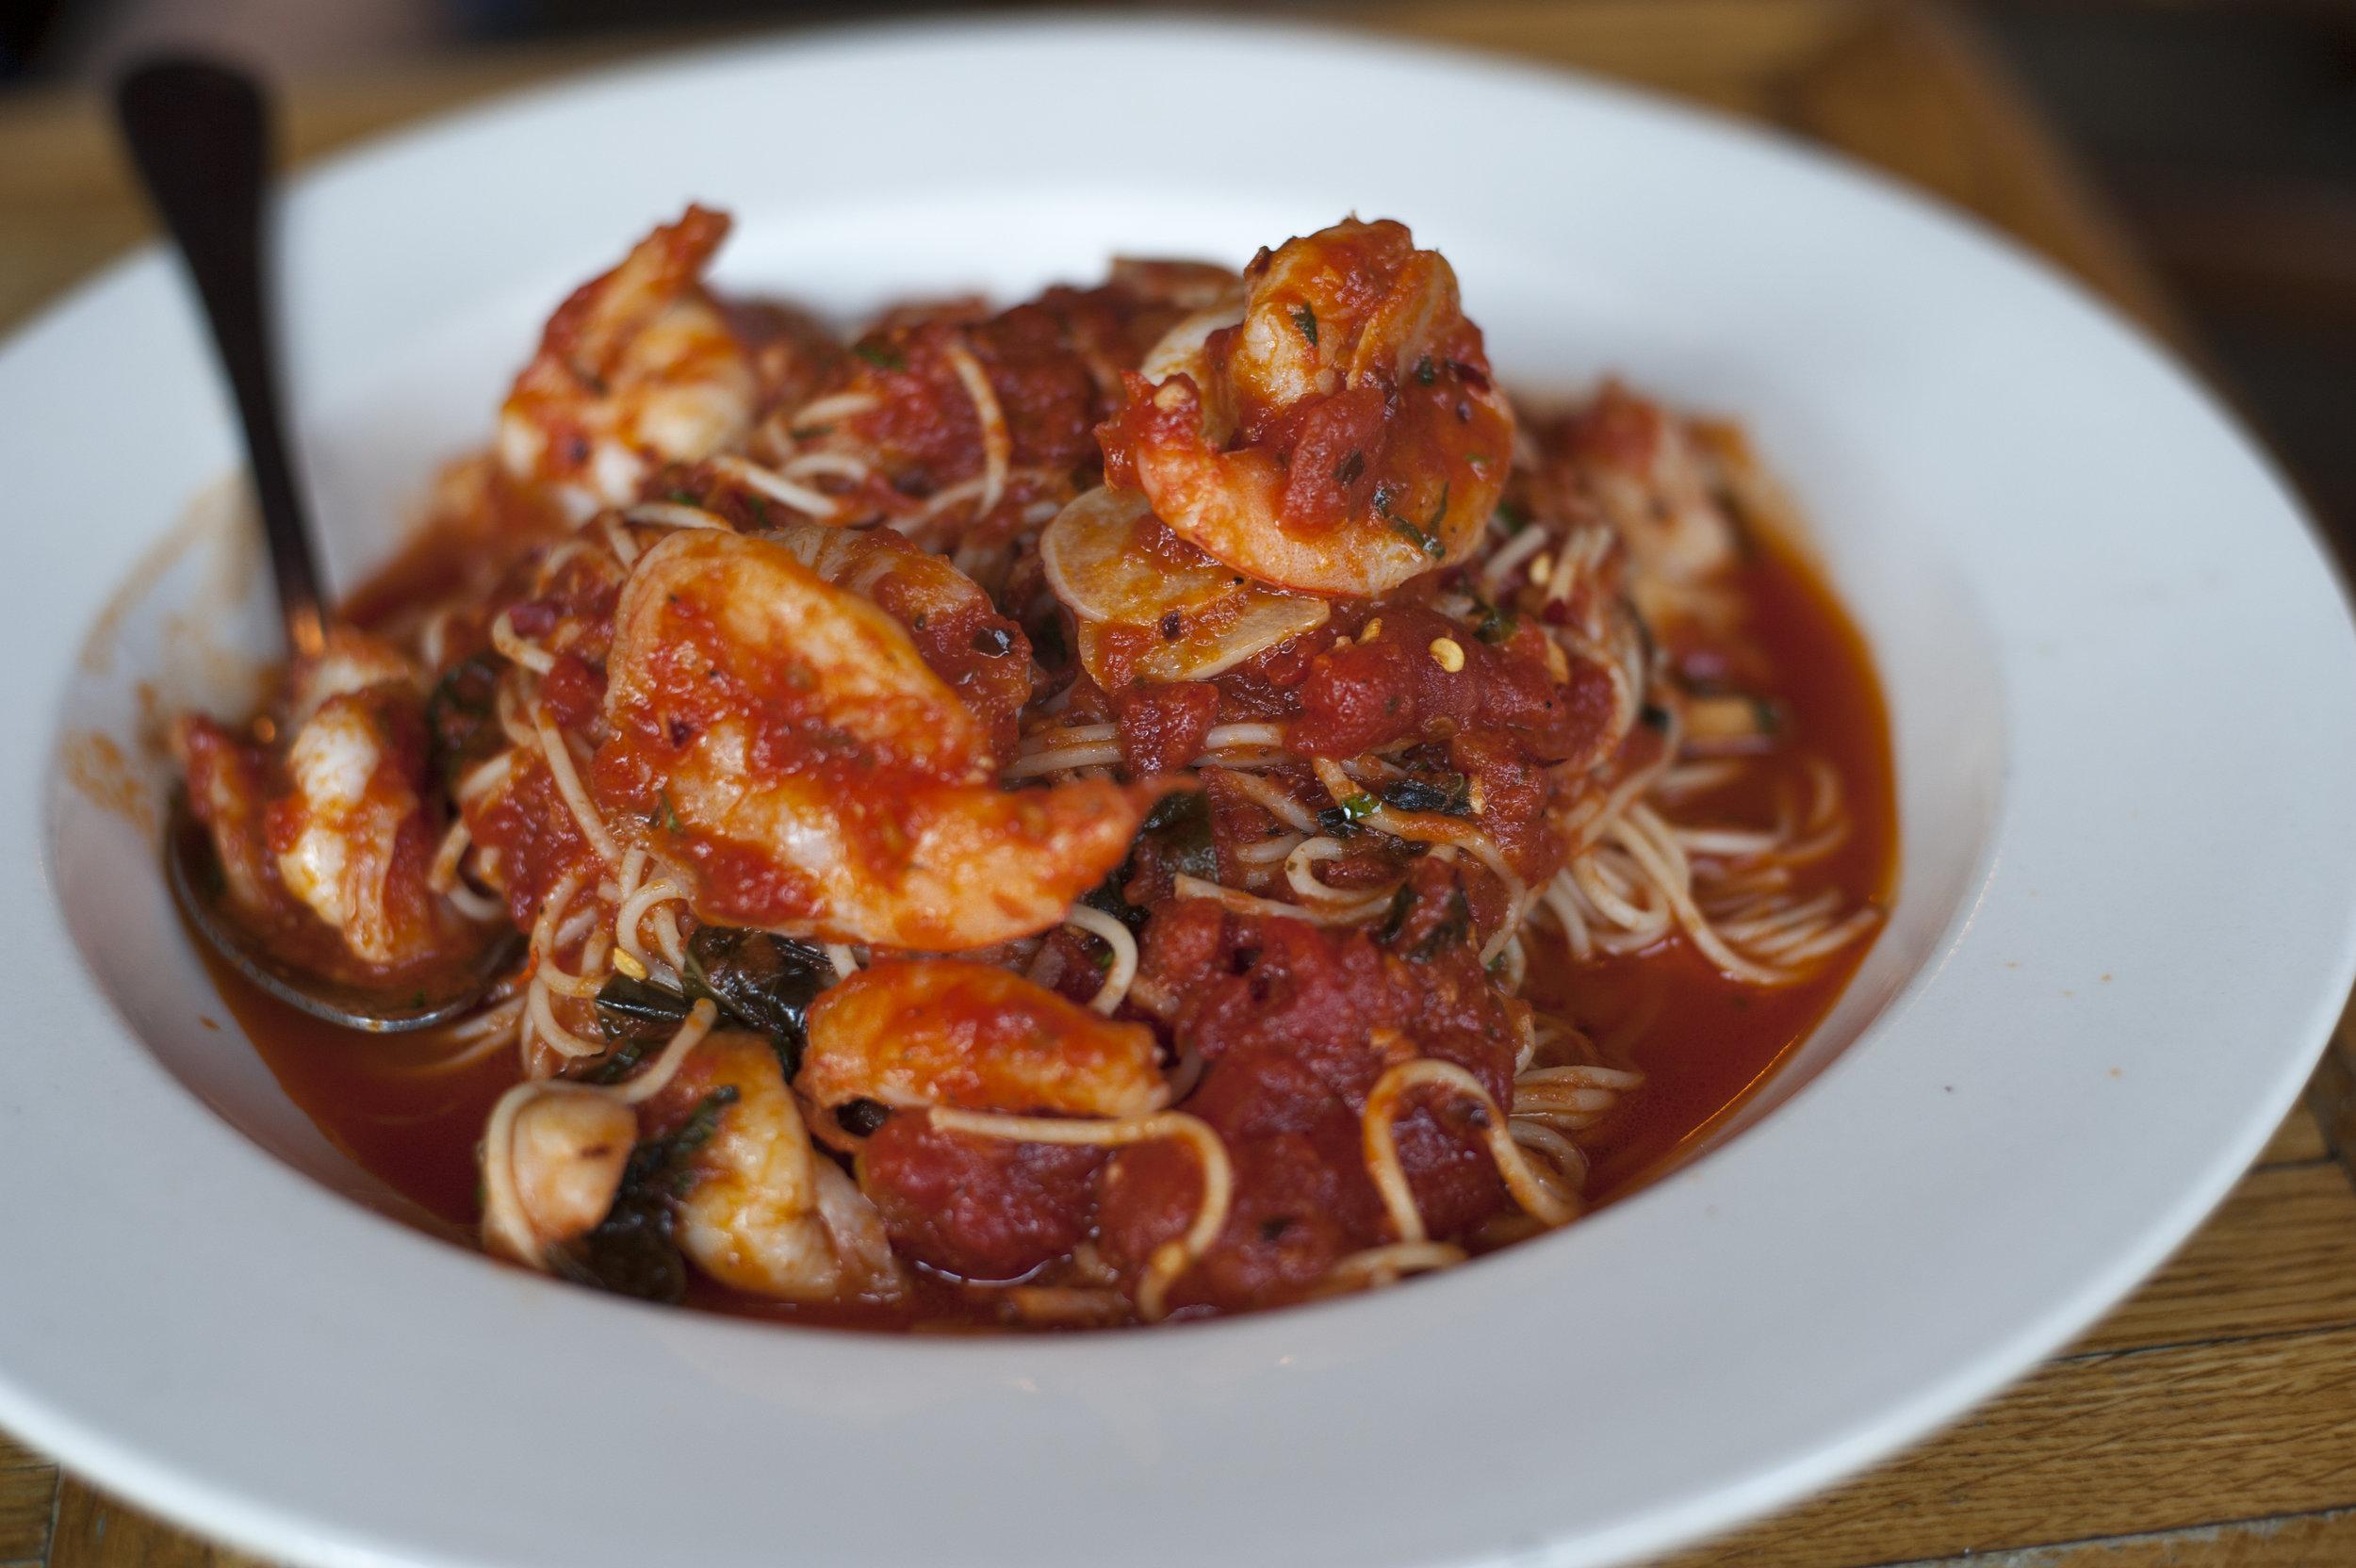  The Shrimp Fra Diavolo features a silky smooth angel hair pasta with perfectly cooked shrimp for a pasta entree to remember, steeped in a generous helping of slightly spicy marinara sauce. 